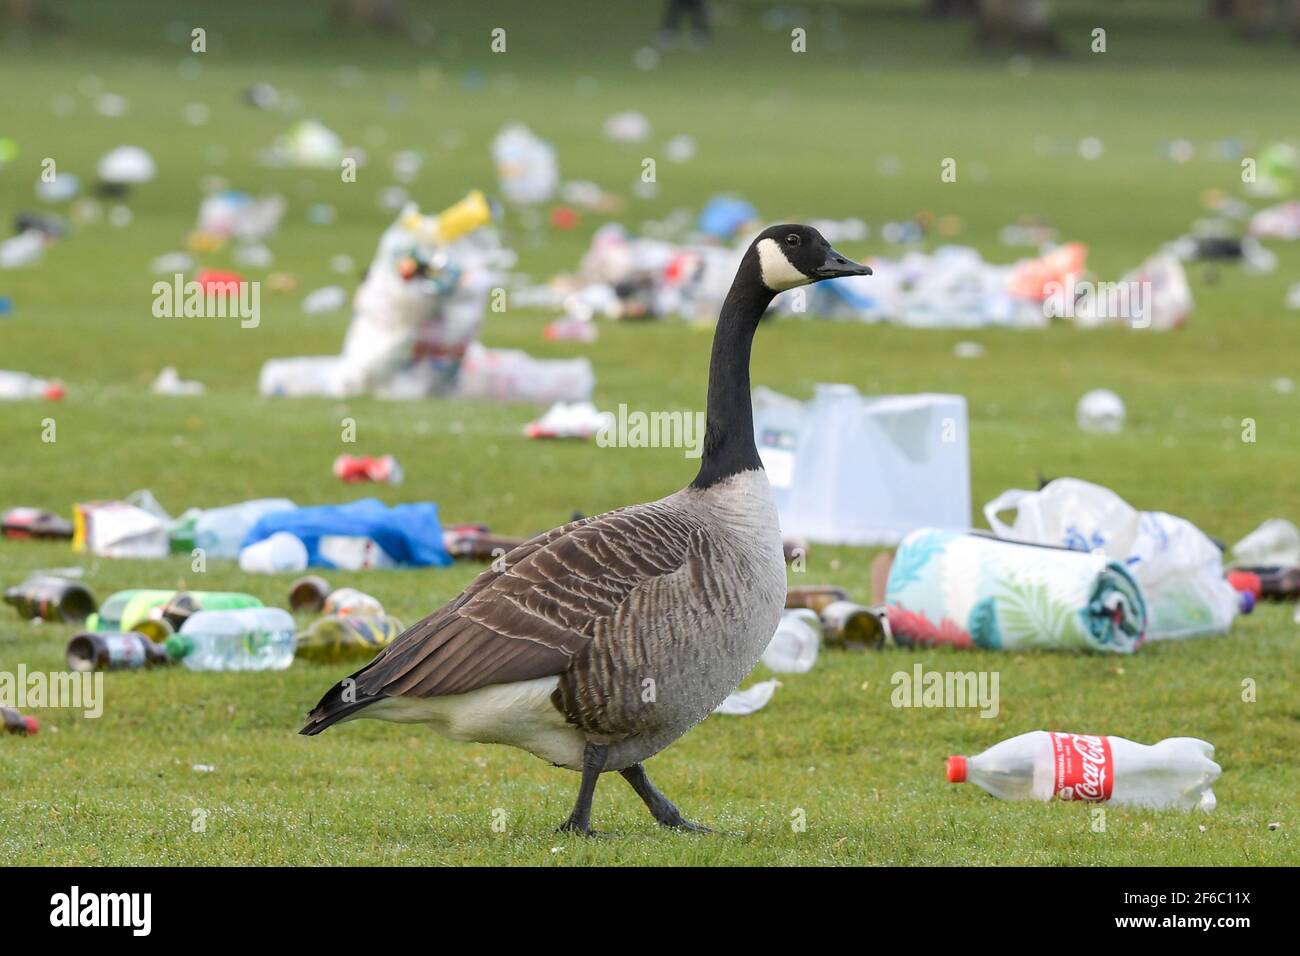 Birmingham, West Midlands, UK. 31st Mar, 2021. A sea of litter was left  strewn across Cannon Hill Park this morning after scores of people came to  sunbathe in yesterday's record breaking March